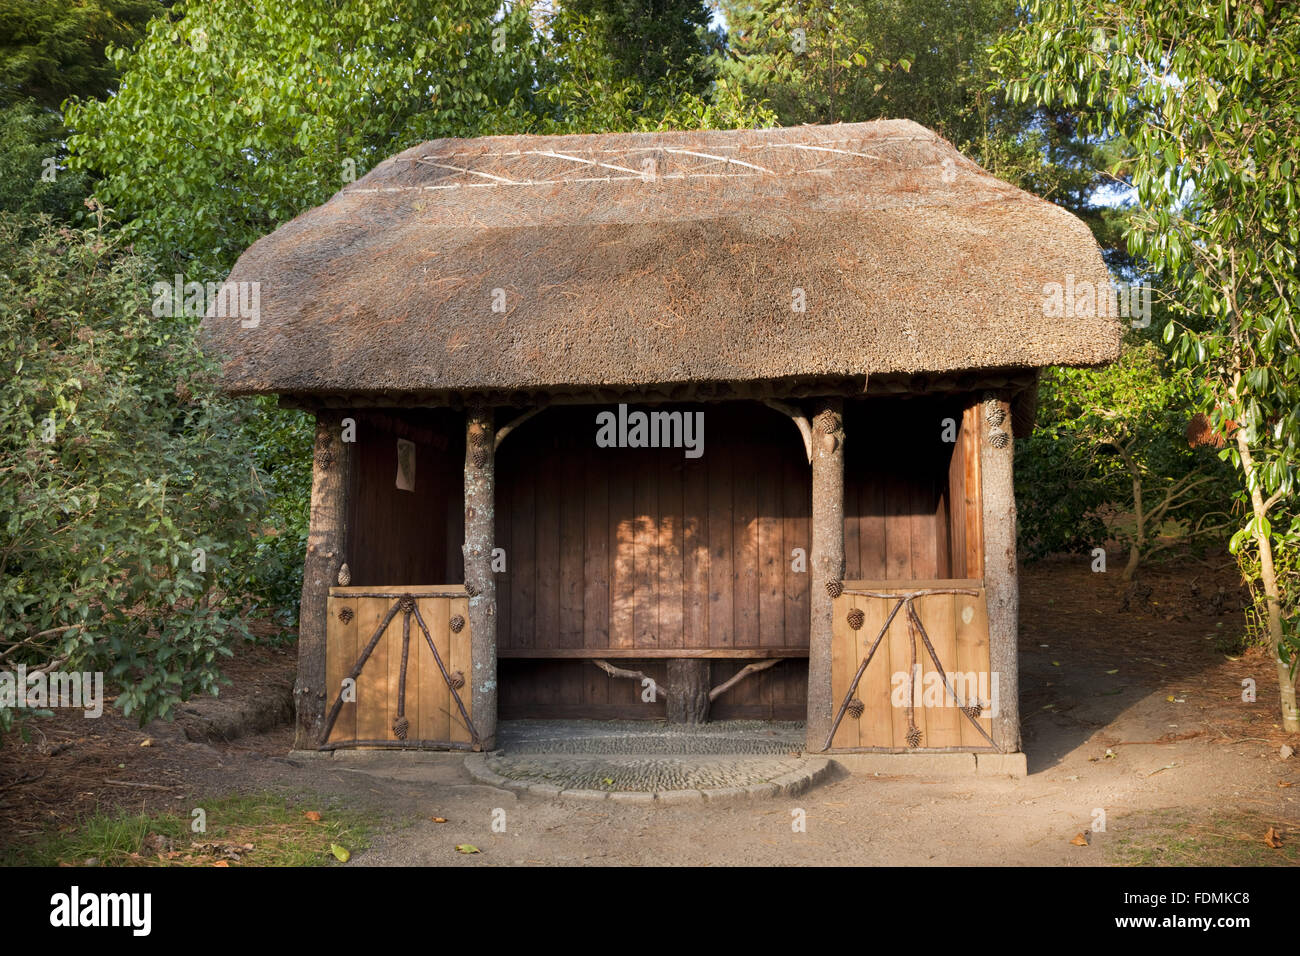 The thatched rustic summer house in Carcaddon at Trelissick Garden, Cornwall. Stock Photo